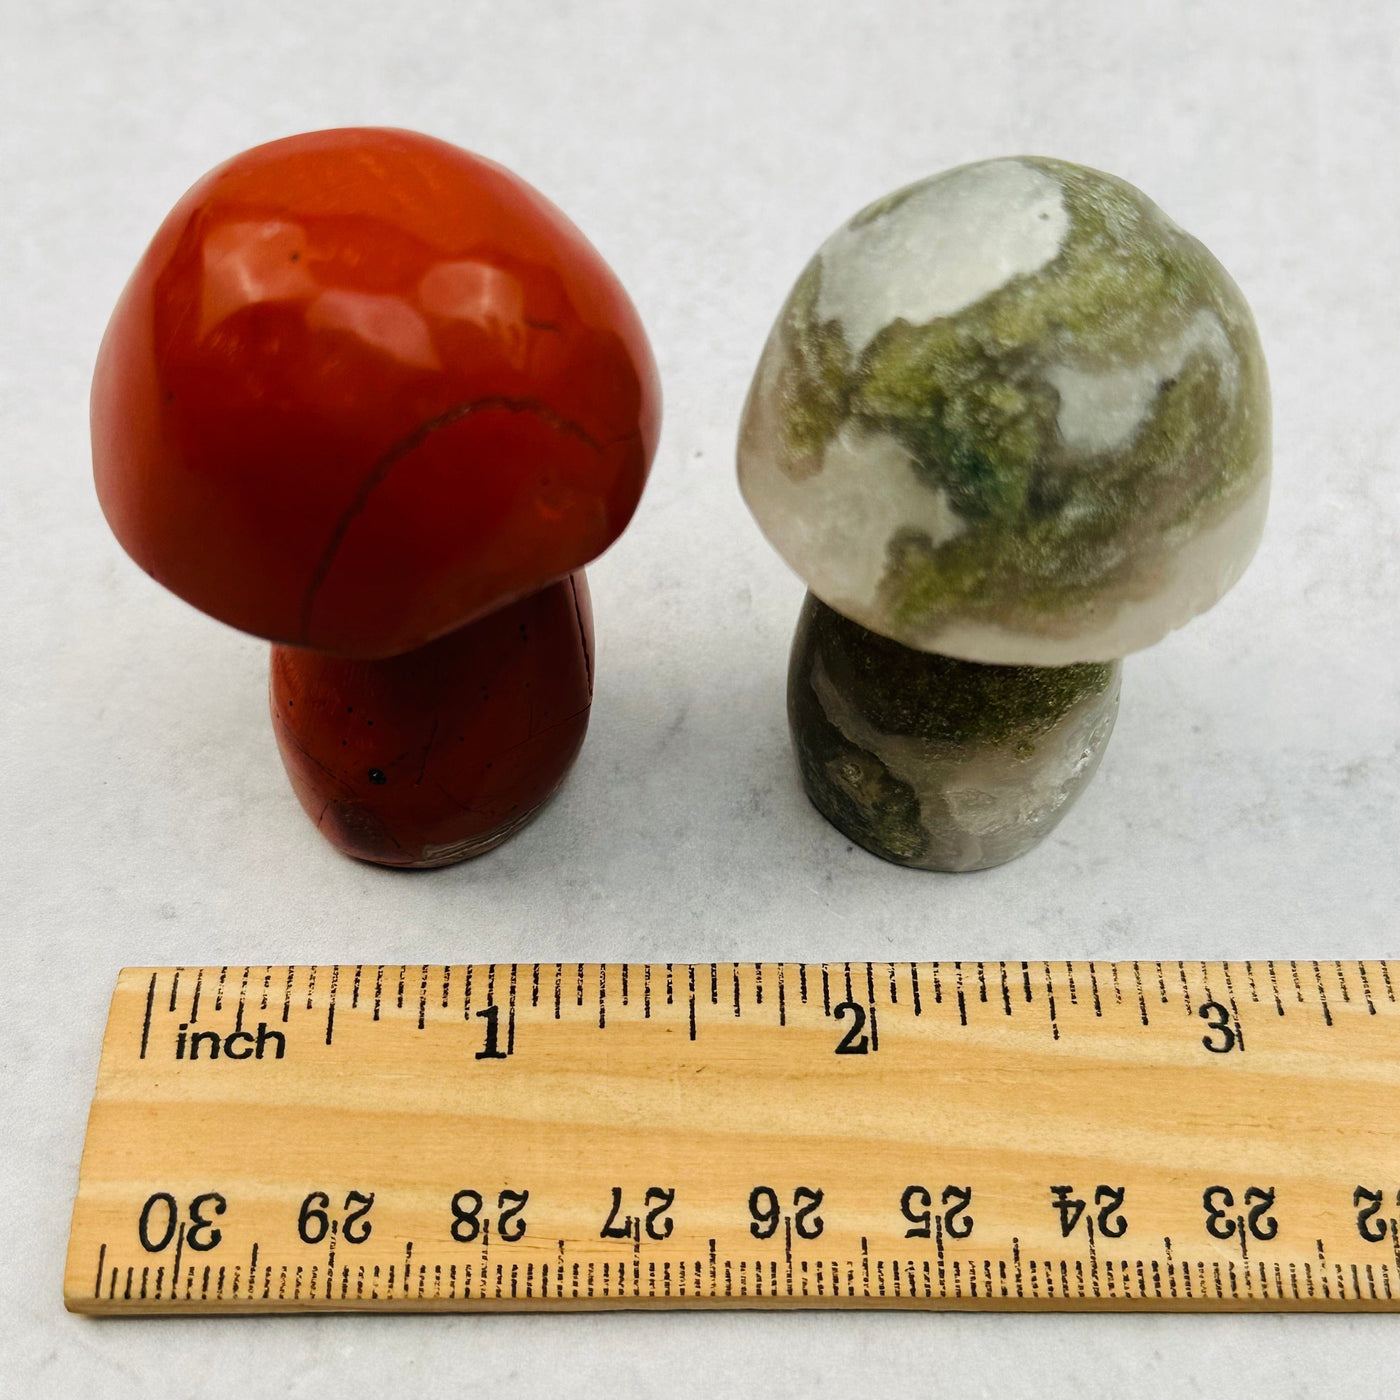 Gemstone Mushroom next to a ruler for size reference 